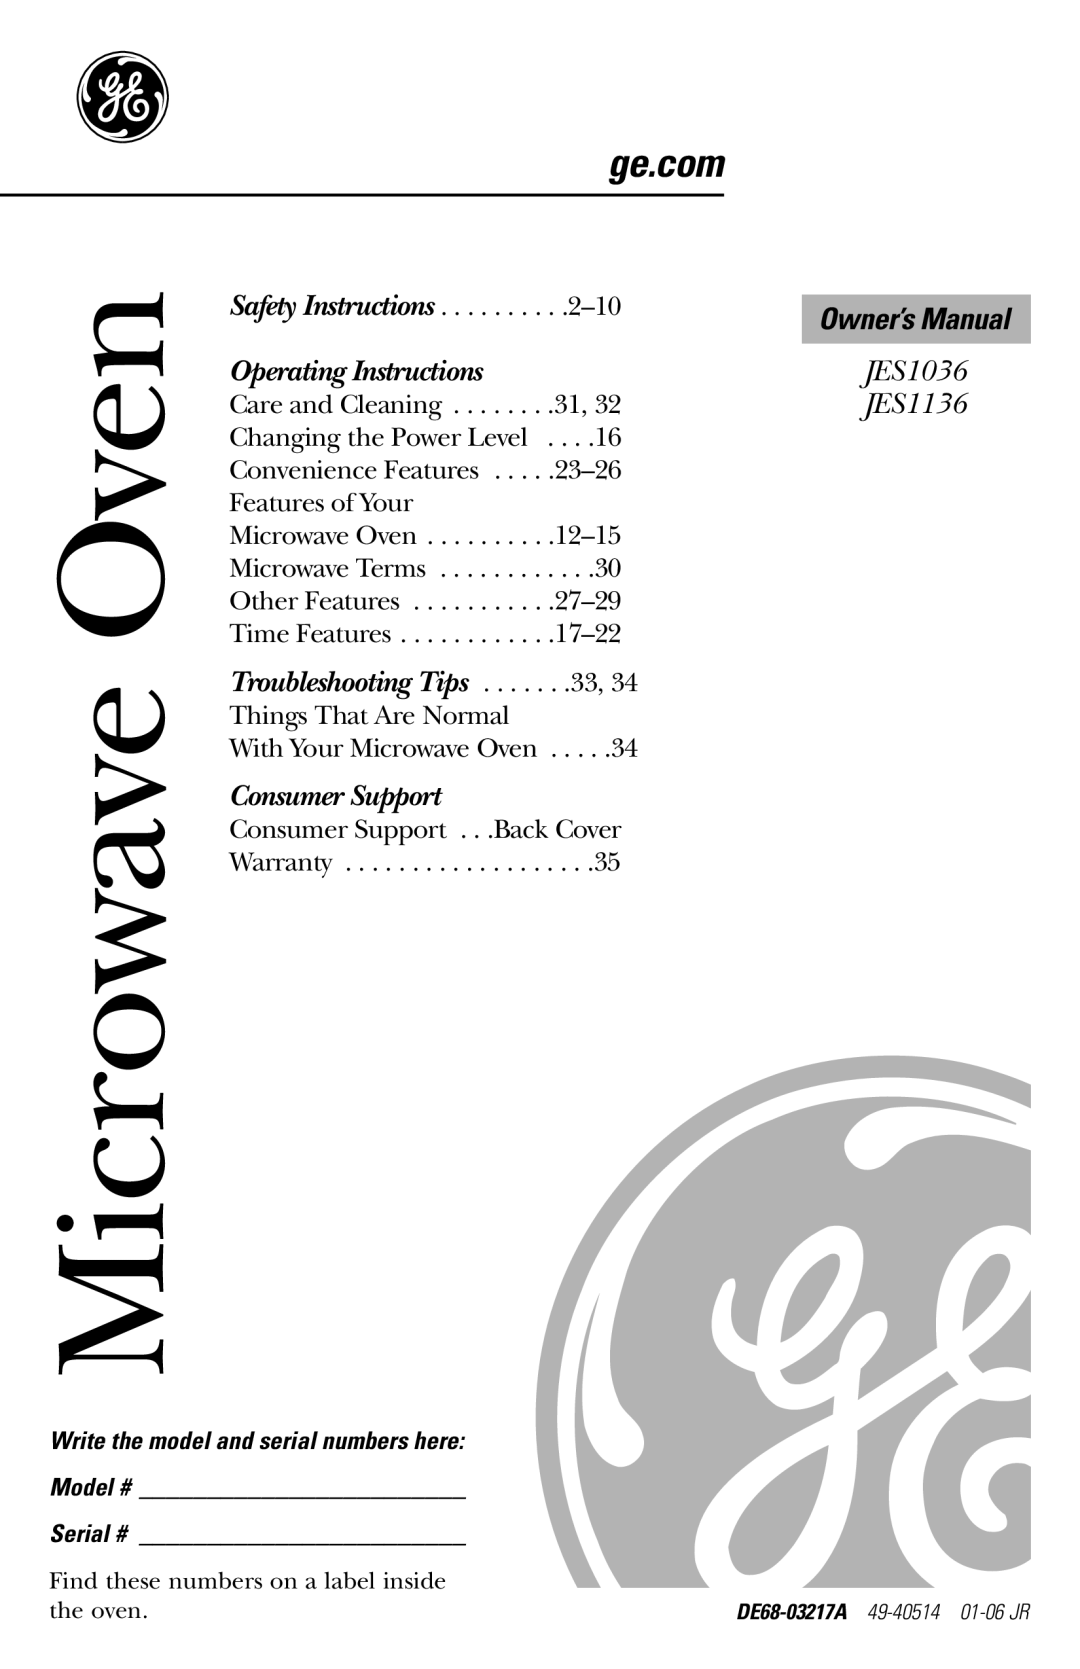 GE JES1136 owner manual ge.com, Model # Serial #, Microwave Oven, Operating Instructions, Troubleshooting Tips 